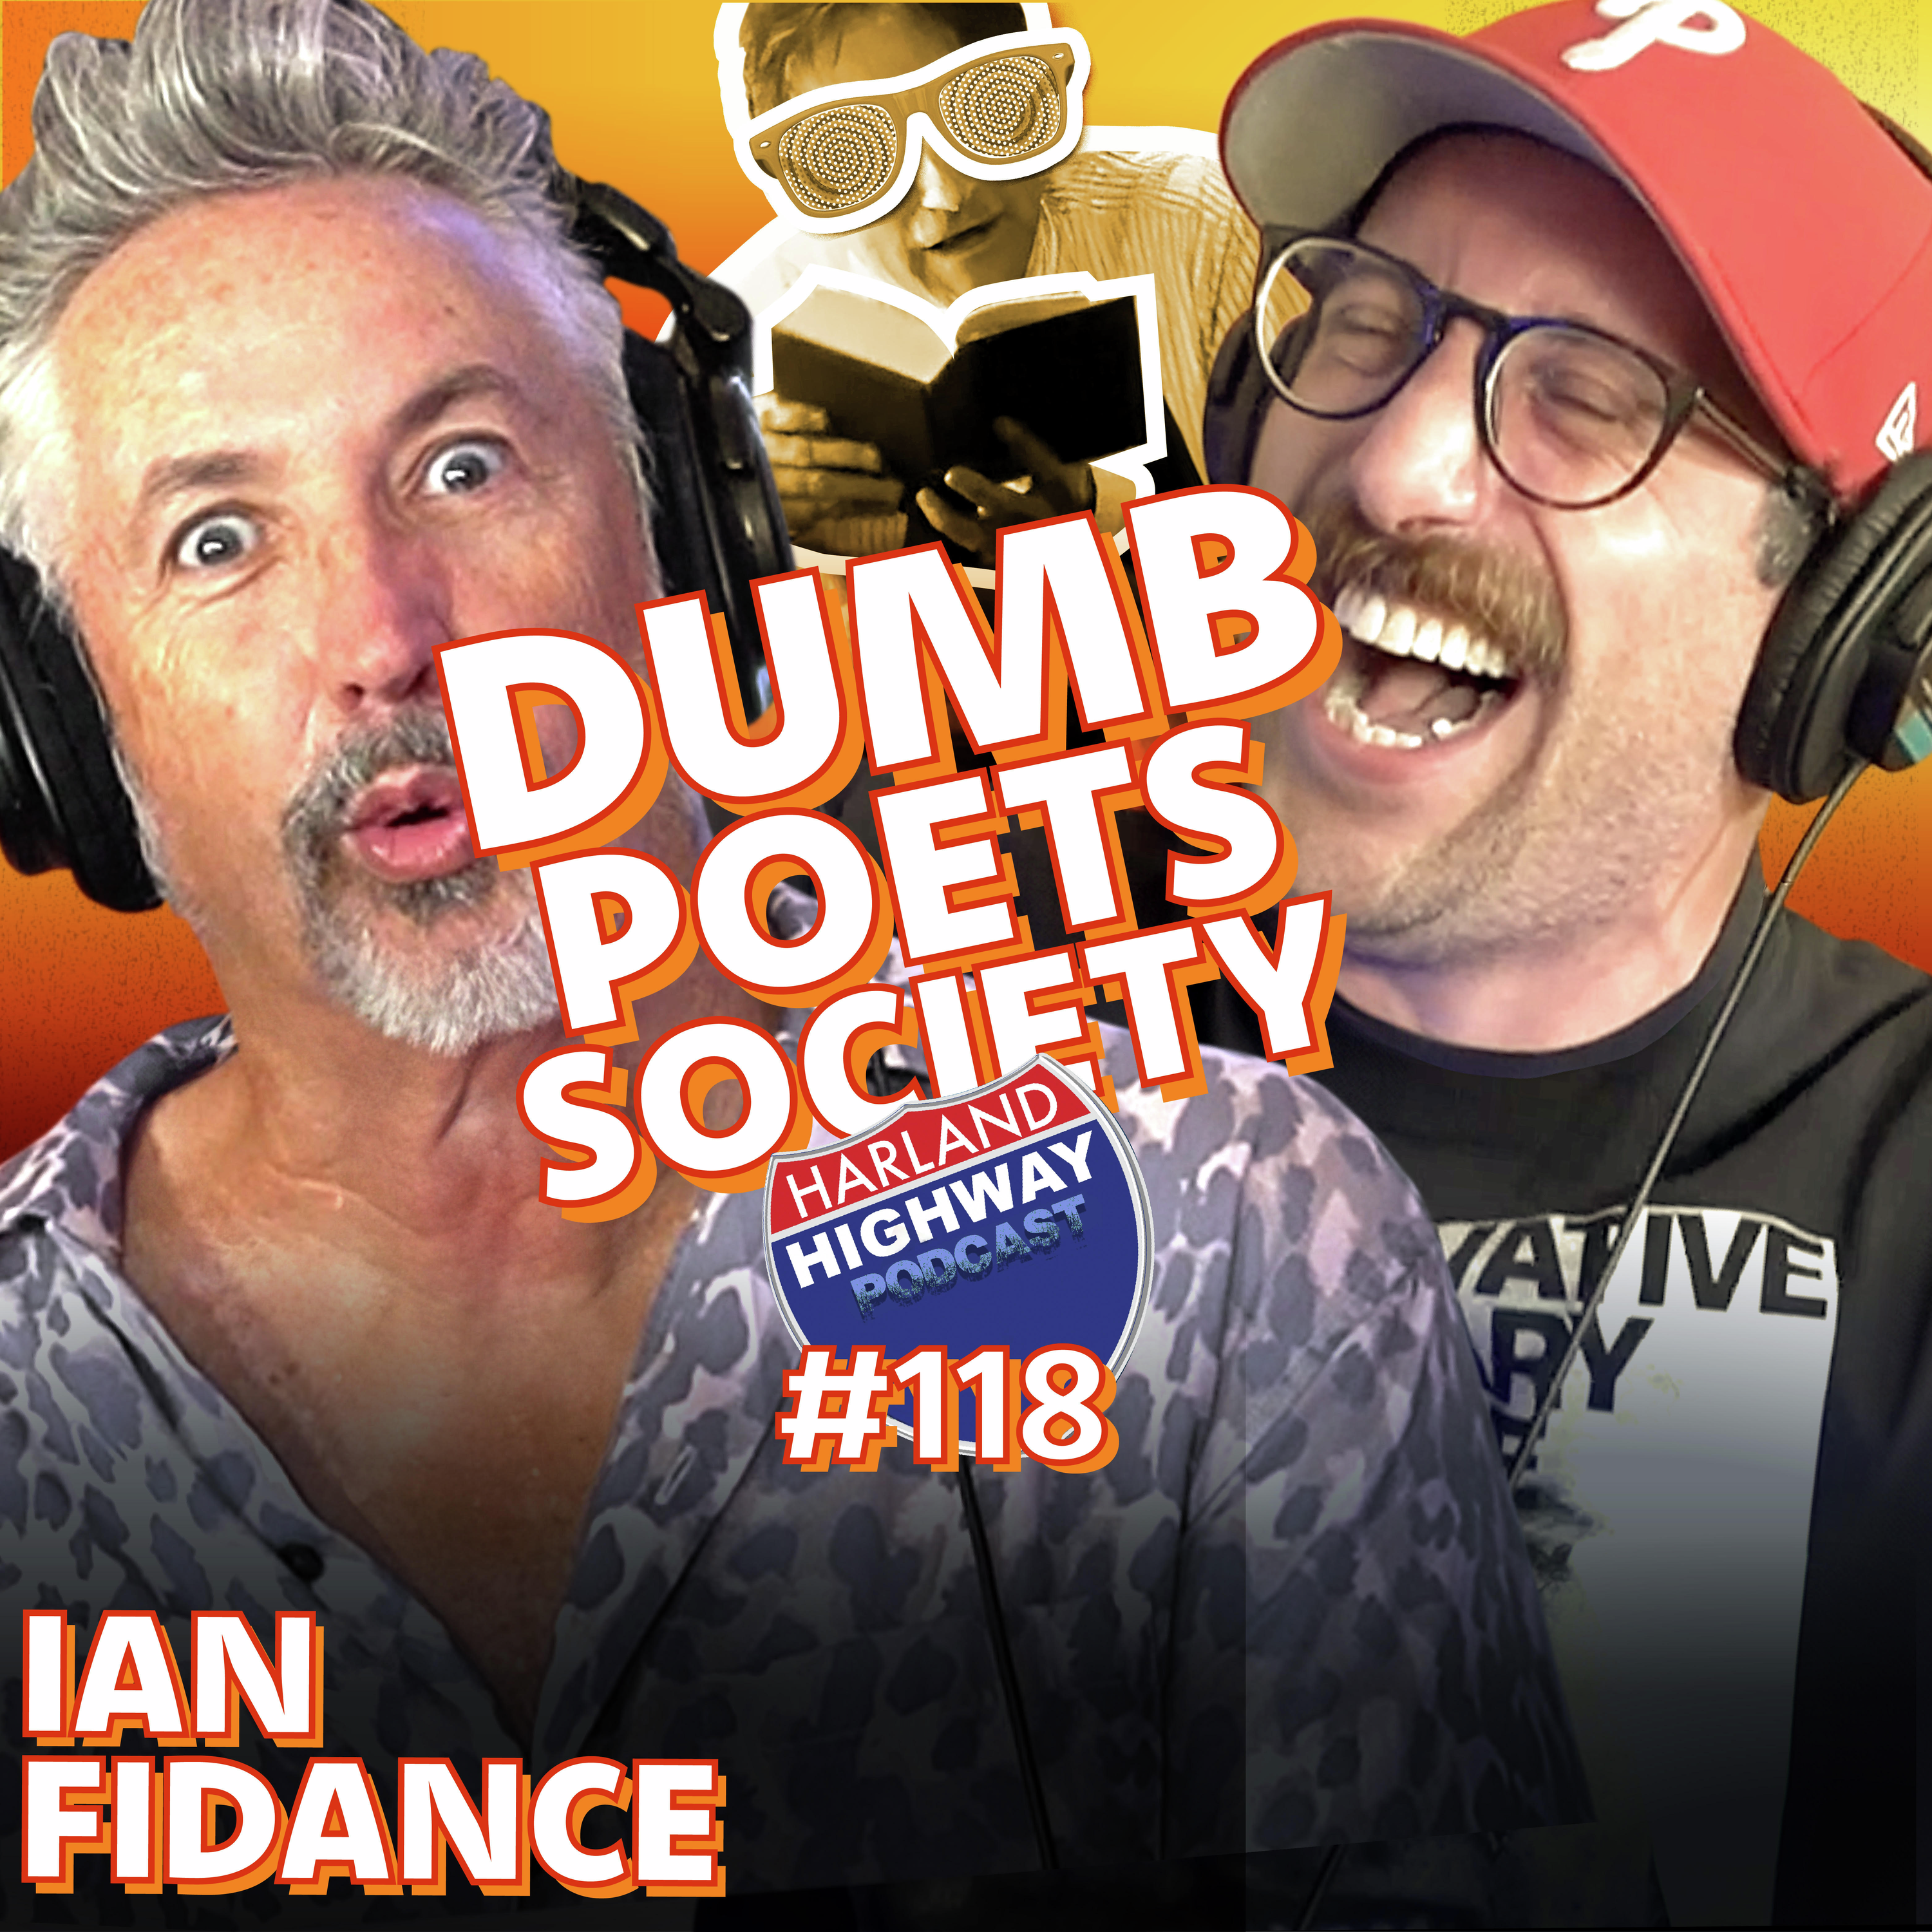 IAN FIDANCE- Delivers some deep, delicious, poetry, and busts a power move with his monster mustache!